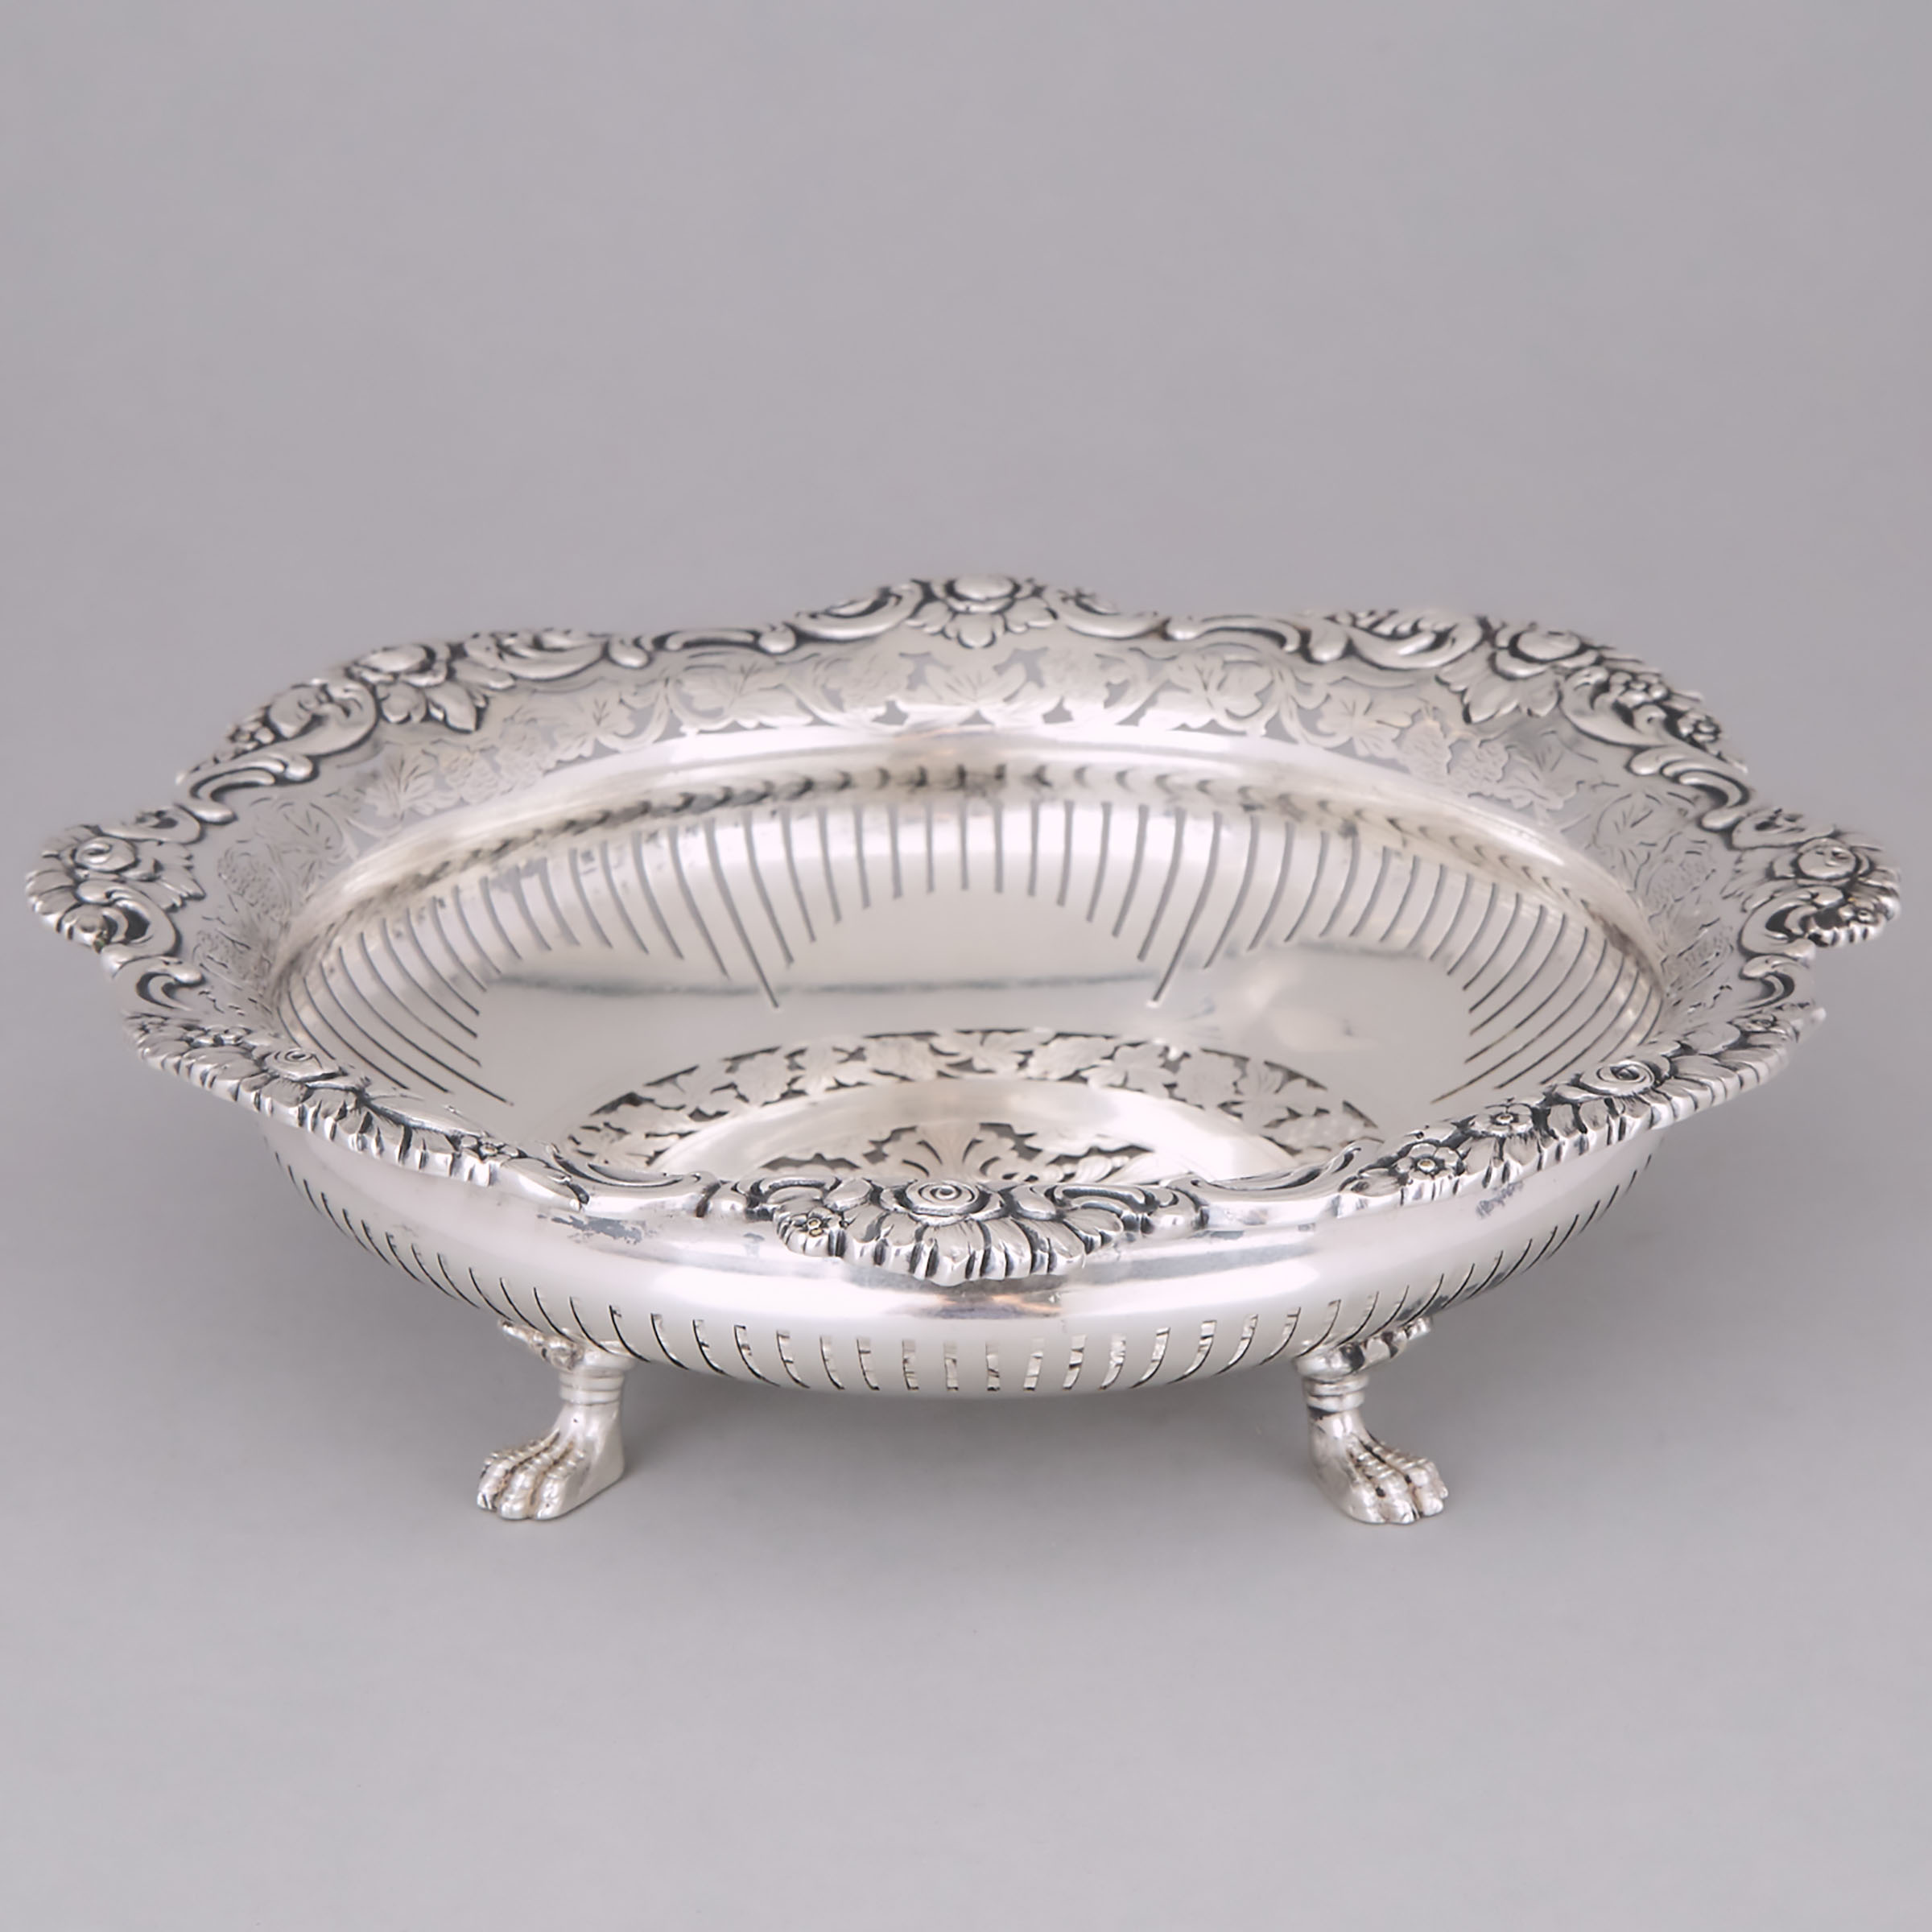 Continental Silver Pierced, Engraved and Moulded Shallow Bowl, probably Austro-Hungarian, late 19th century